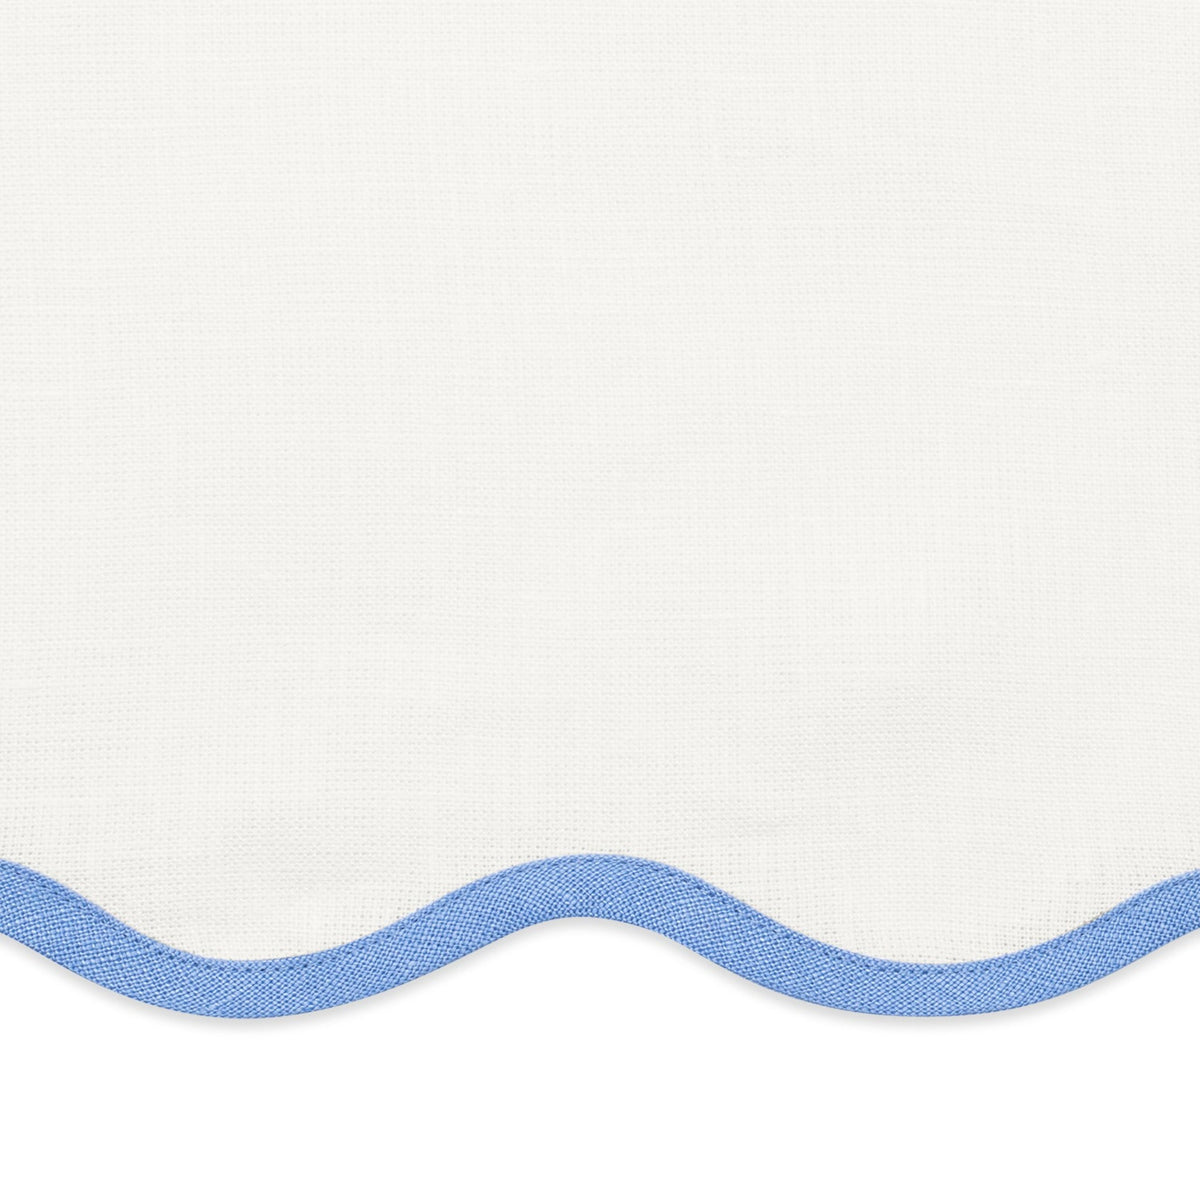 Swatch Sample of Matouk Scallop Edge Table Linens in Sky Blue Color